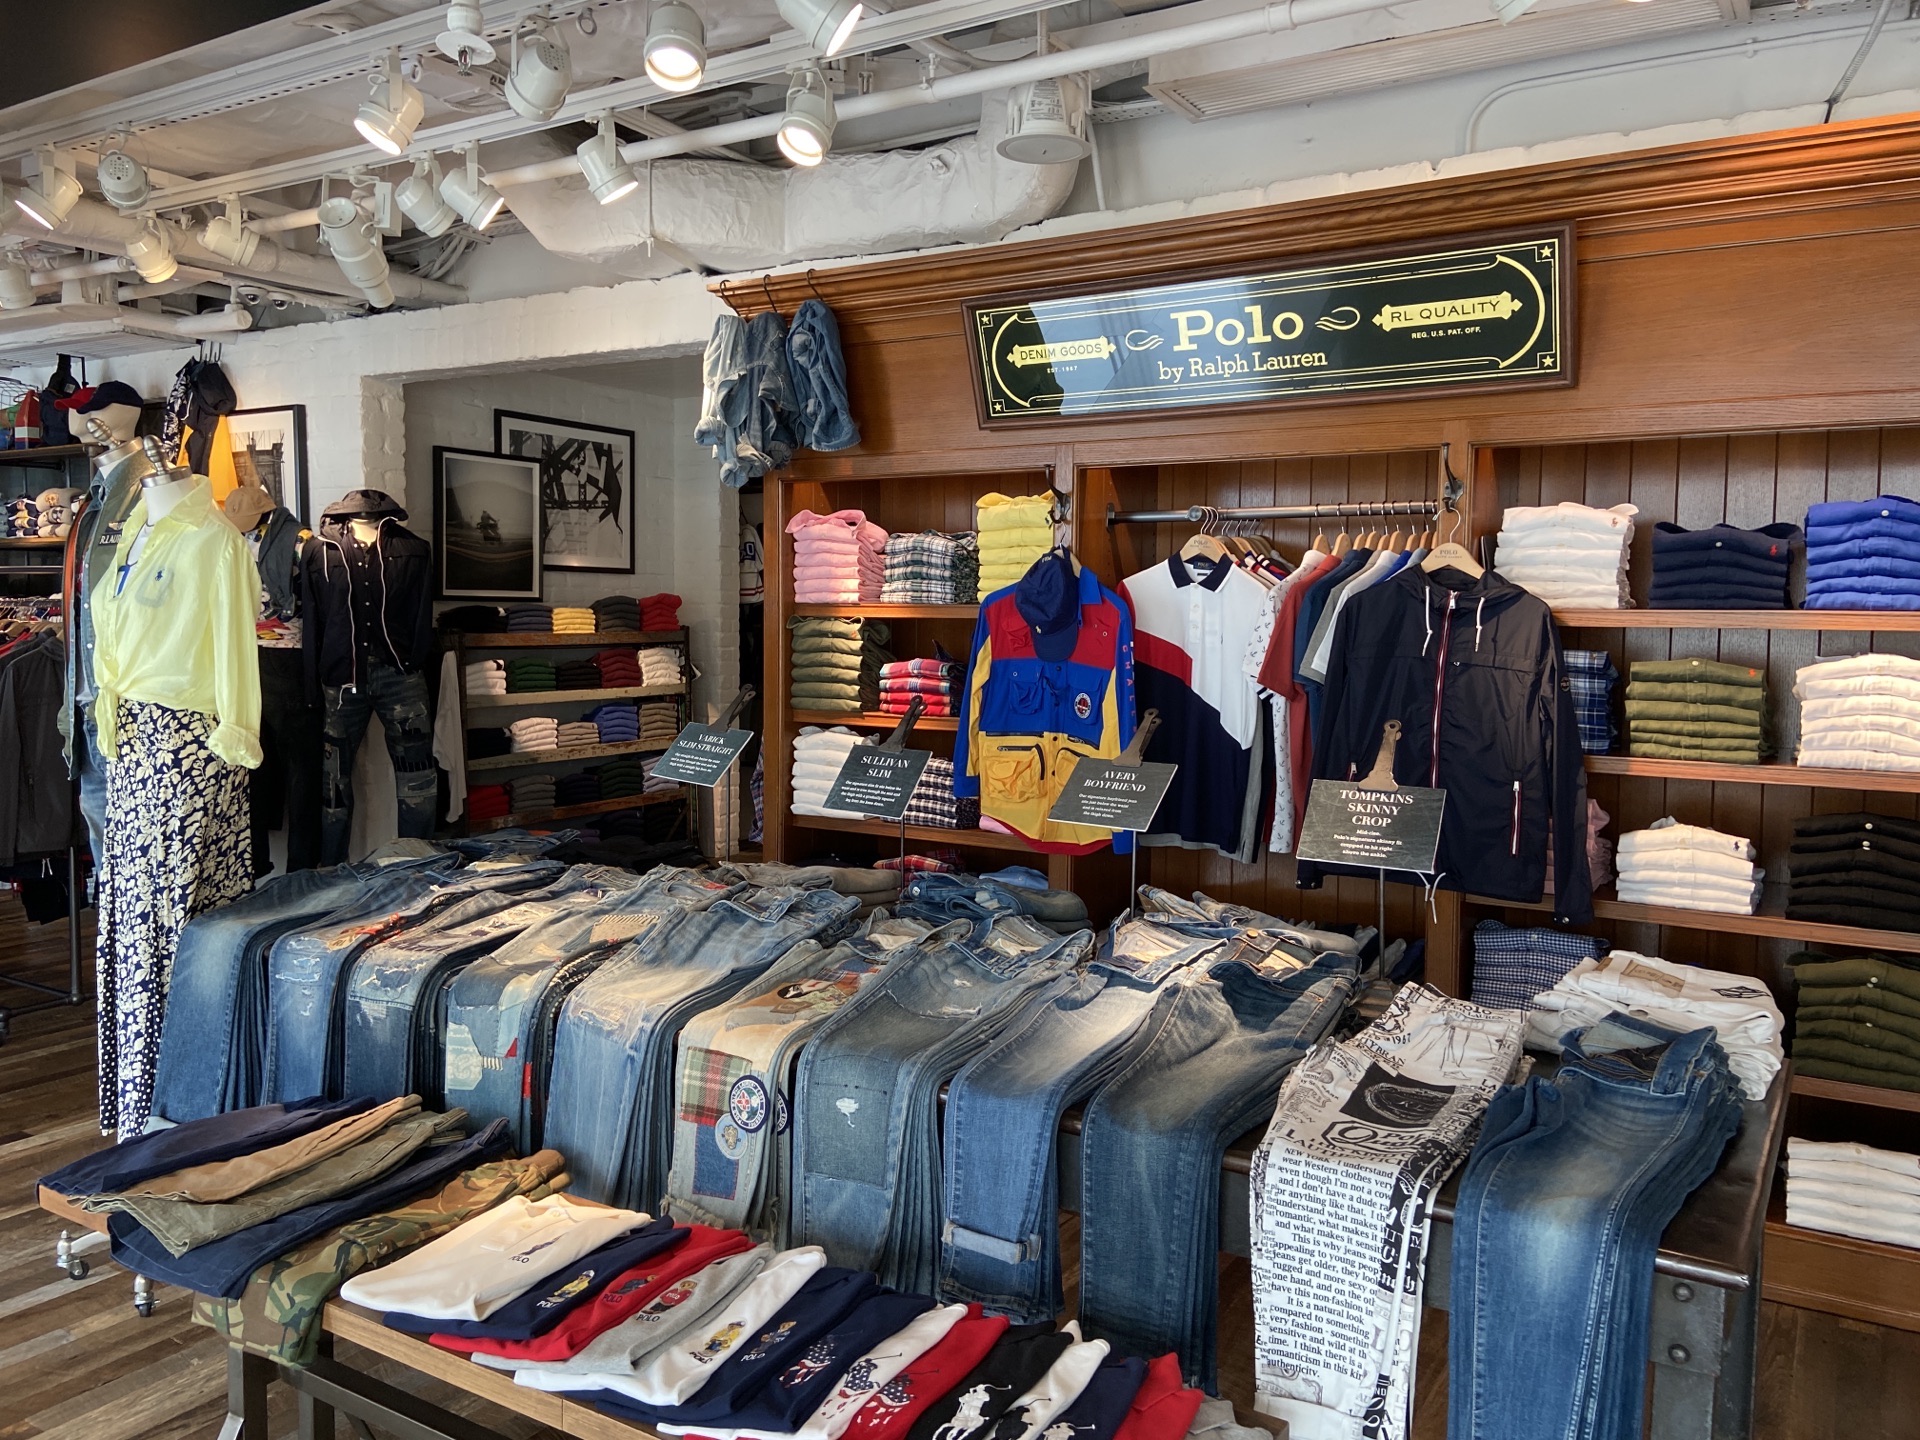 Polo Ralph Lauren（海港城店） travel guidebook –must visit attractions in Hong  Kong – Polo Ralph Lauren（海港城店） nearby recommendation – Trip.com